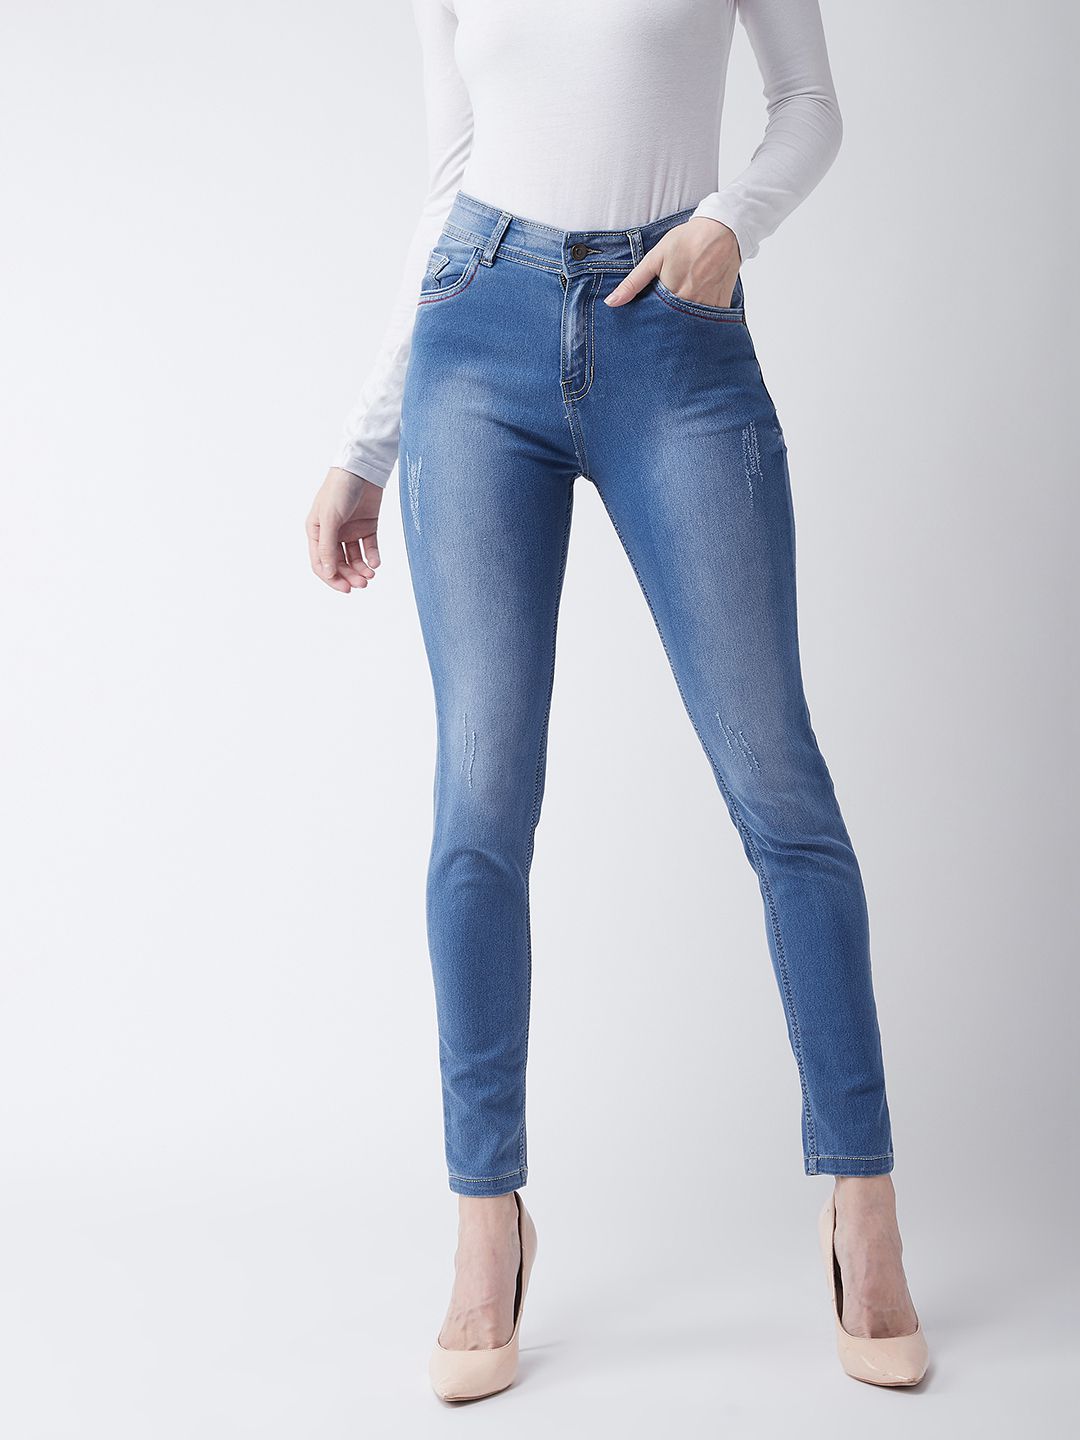     			Miss Chase - Blue Denim Skinny Fit Women's Jeans ( Pack of 1 )